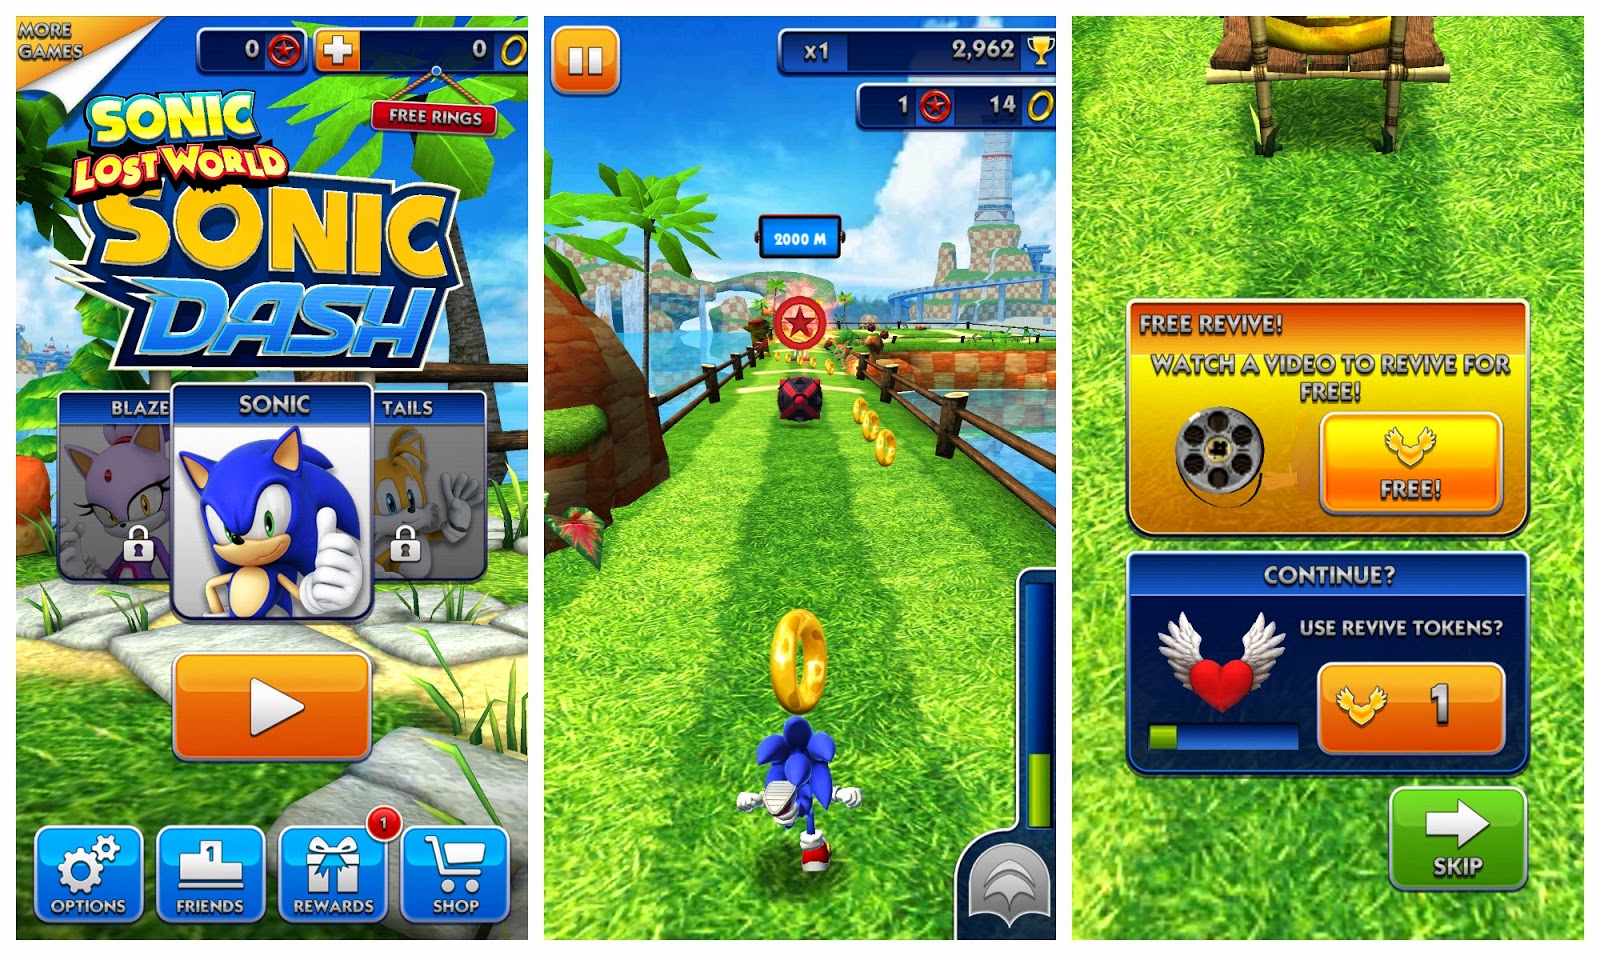 Sonic Dash 1.12.0 Apk Mod Unlimited Rings Stars - Android ...